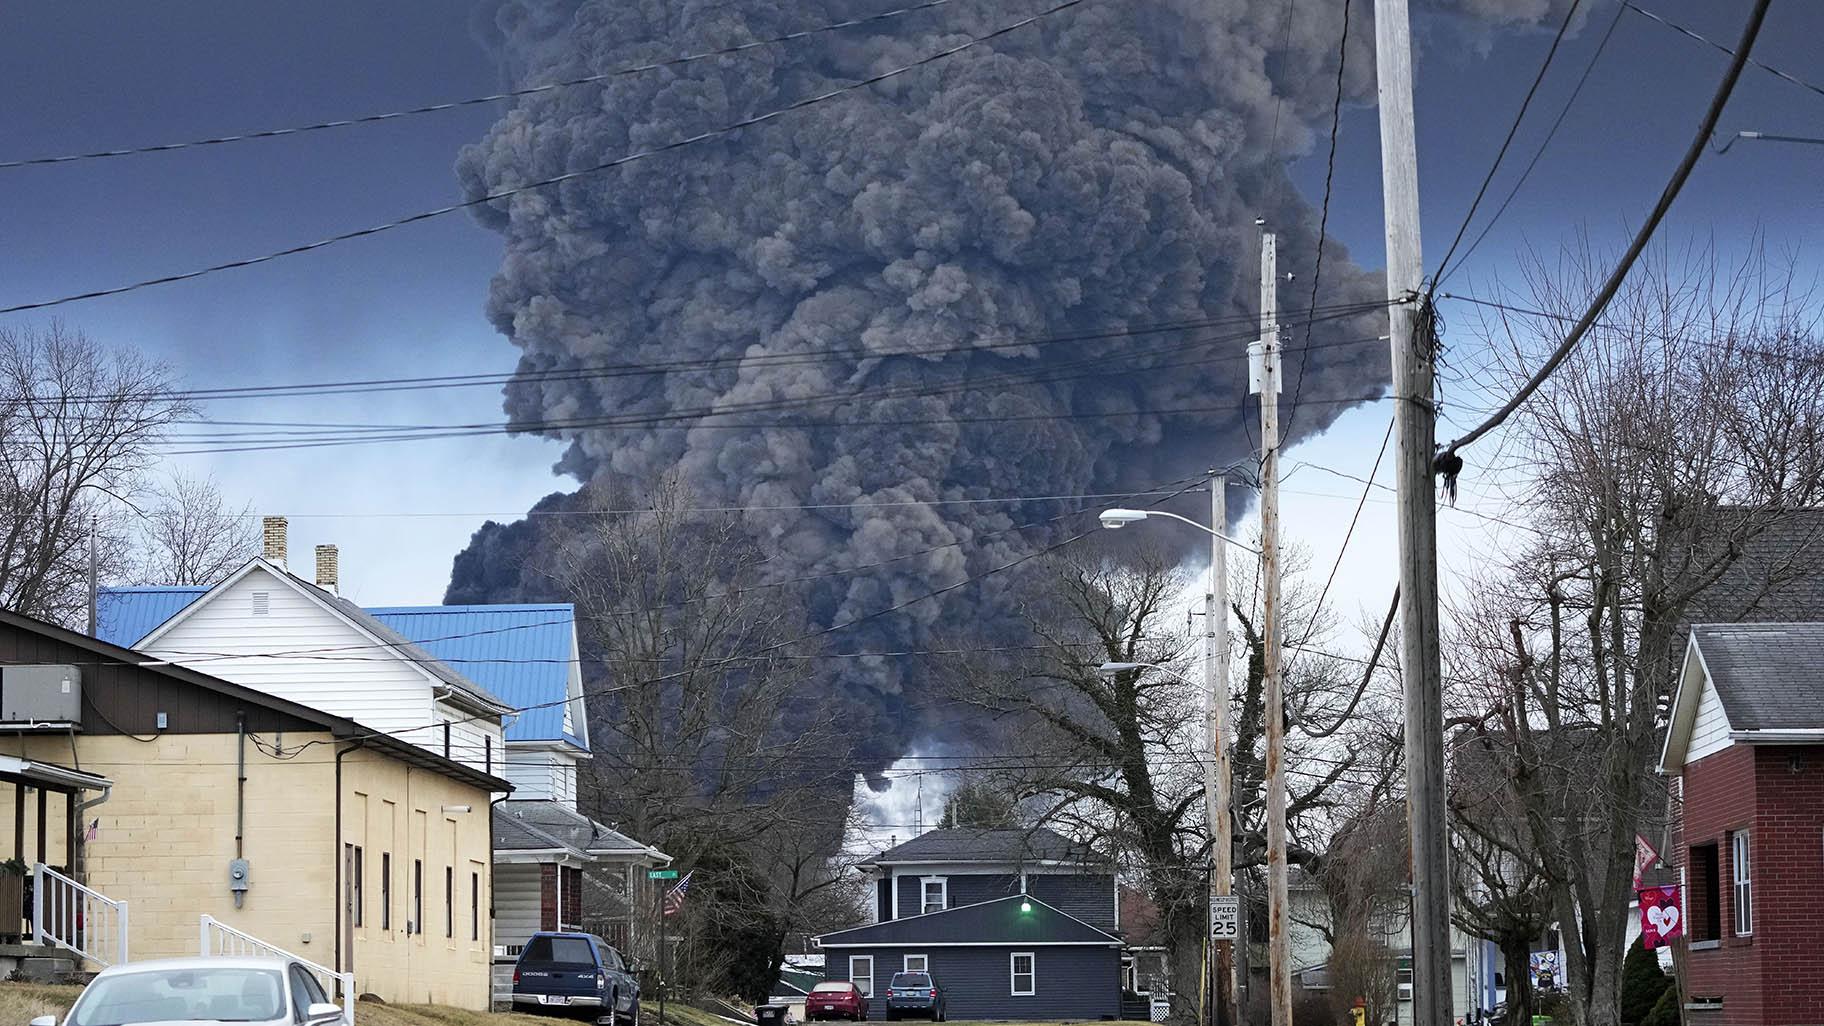 A black plume rises over East Palestine, Ohio, as a result of a controlled detonation of a portion of the derailed Norfolk and Southern trains Monday, Feb. 6, 2023. (AP Photo / Gene J. Puskar)